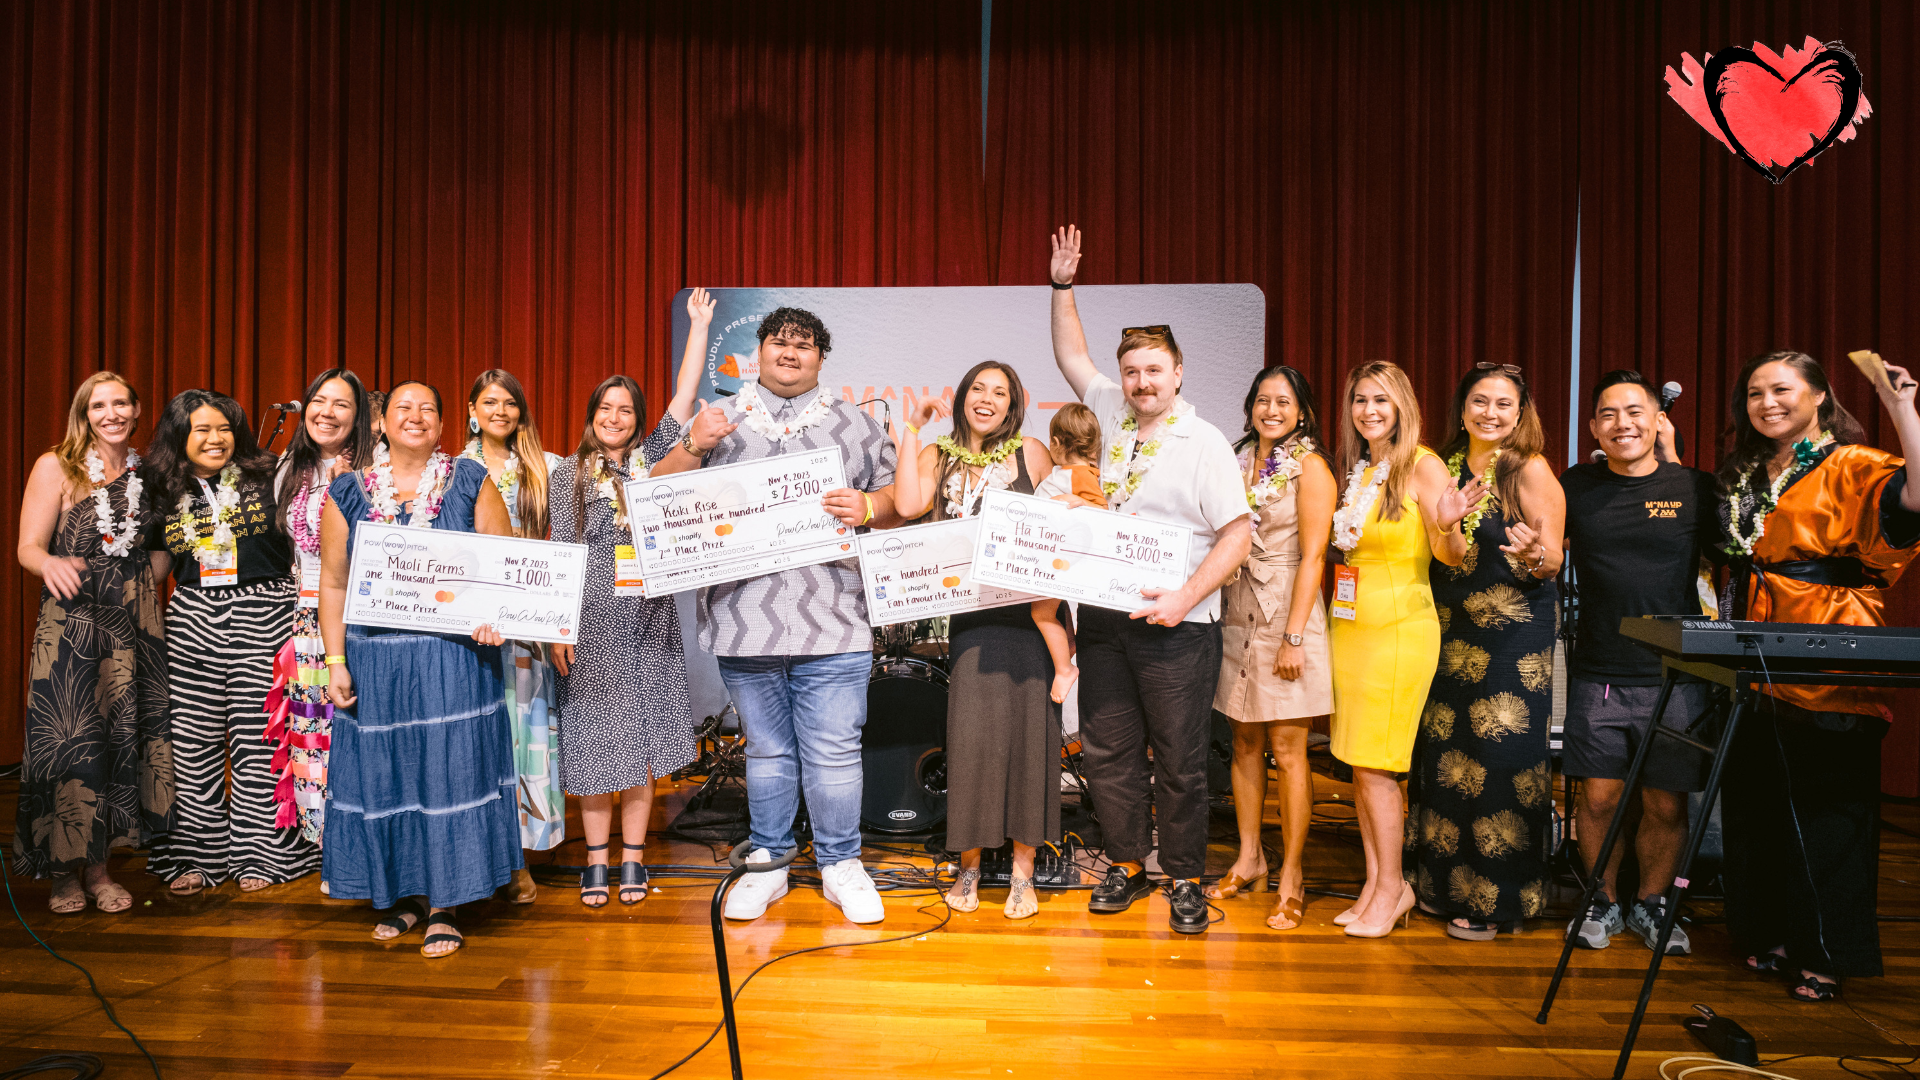 Pow Wow Pitch on Instagram: The Winner of the 2022 Pow Wow Pitch Second  Place Prize of $10,000 presented by @mastercardca went to Sean  Rayland-Boubar, Founder of Winnipeg-based Red Rebel Armour from